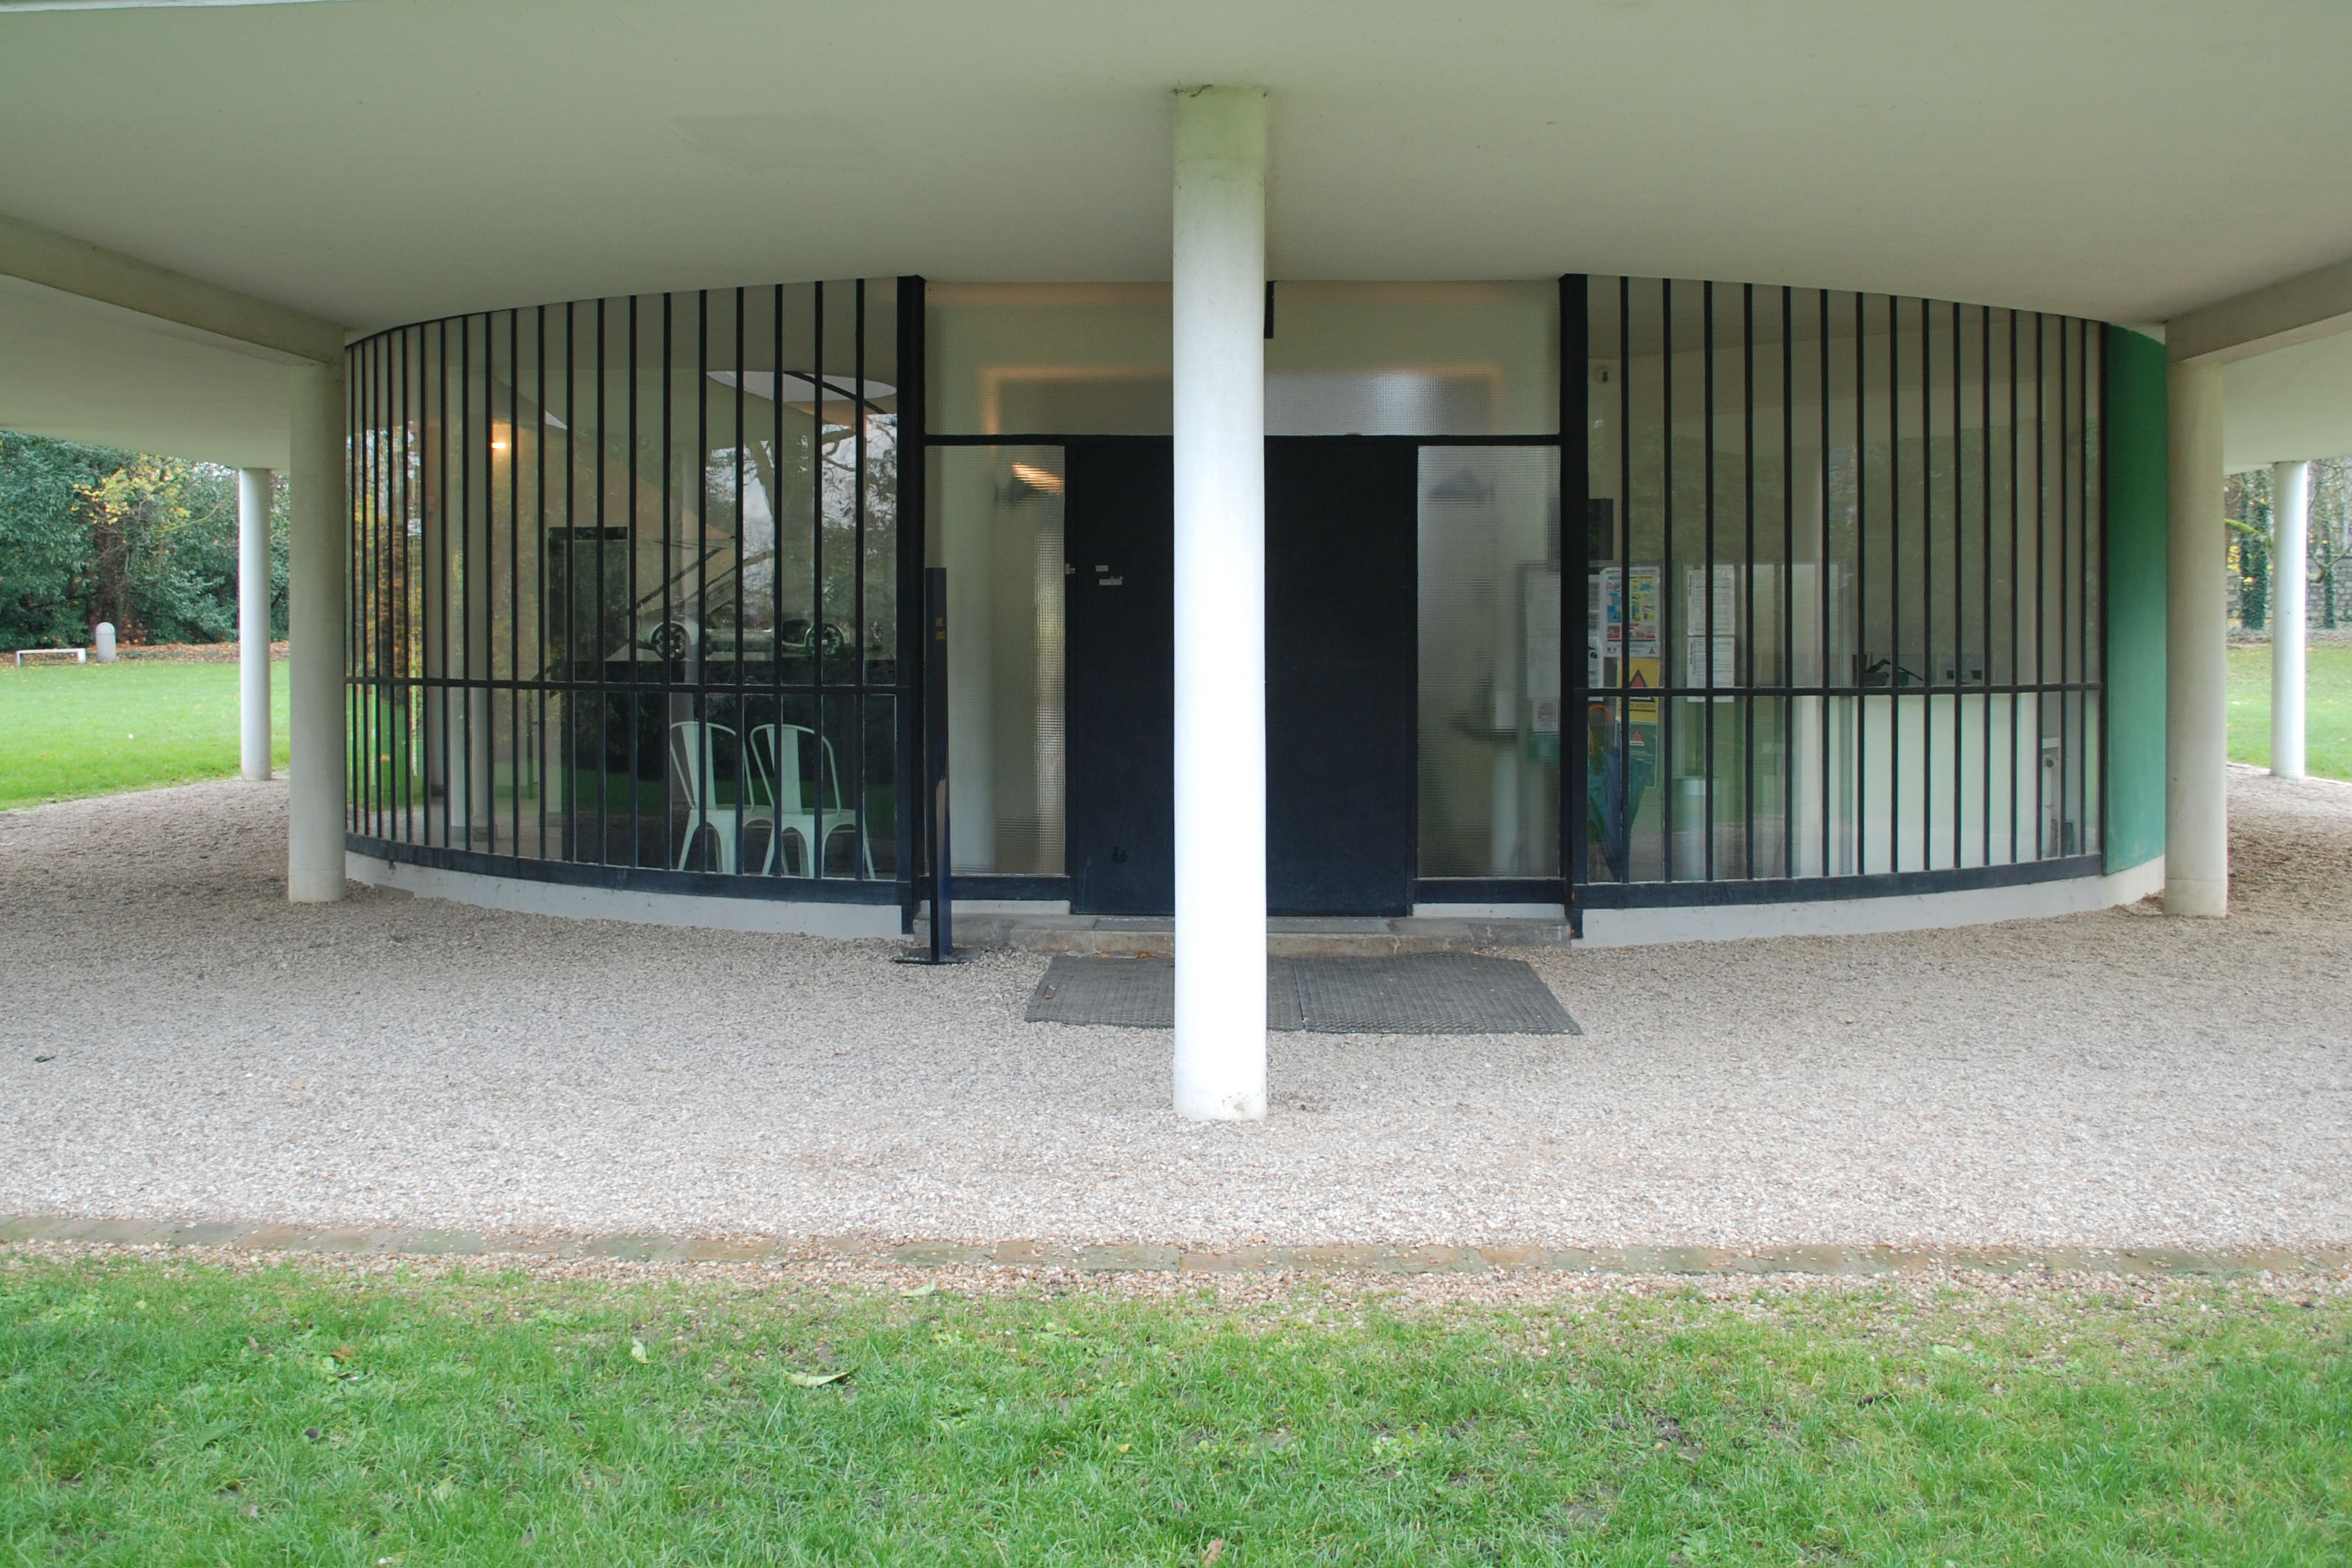 LE CORBUSIER, POISSY: “TRAFFIC AND GROUND BELOW”